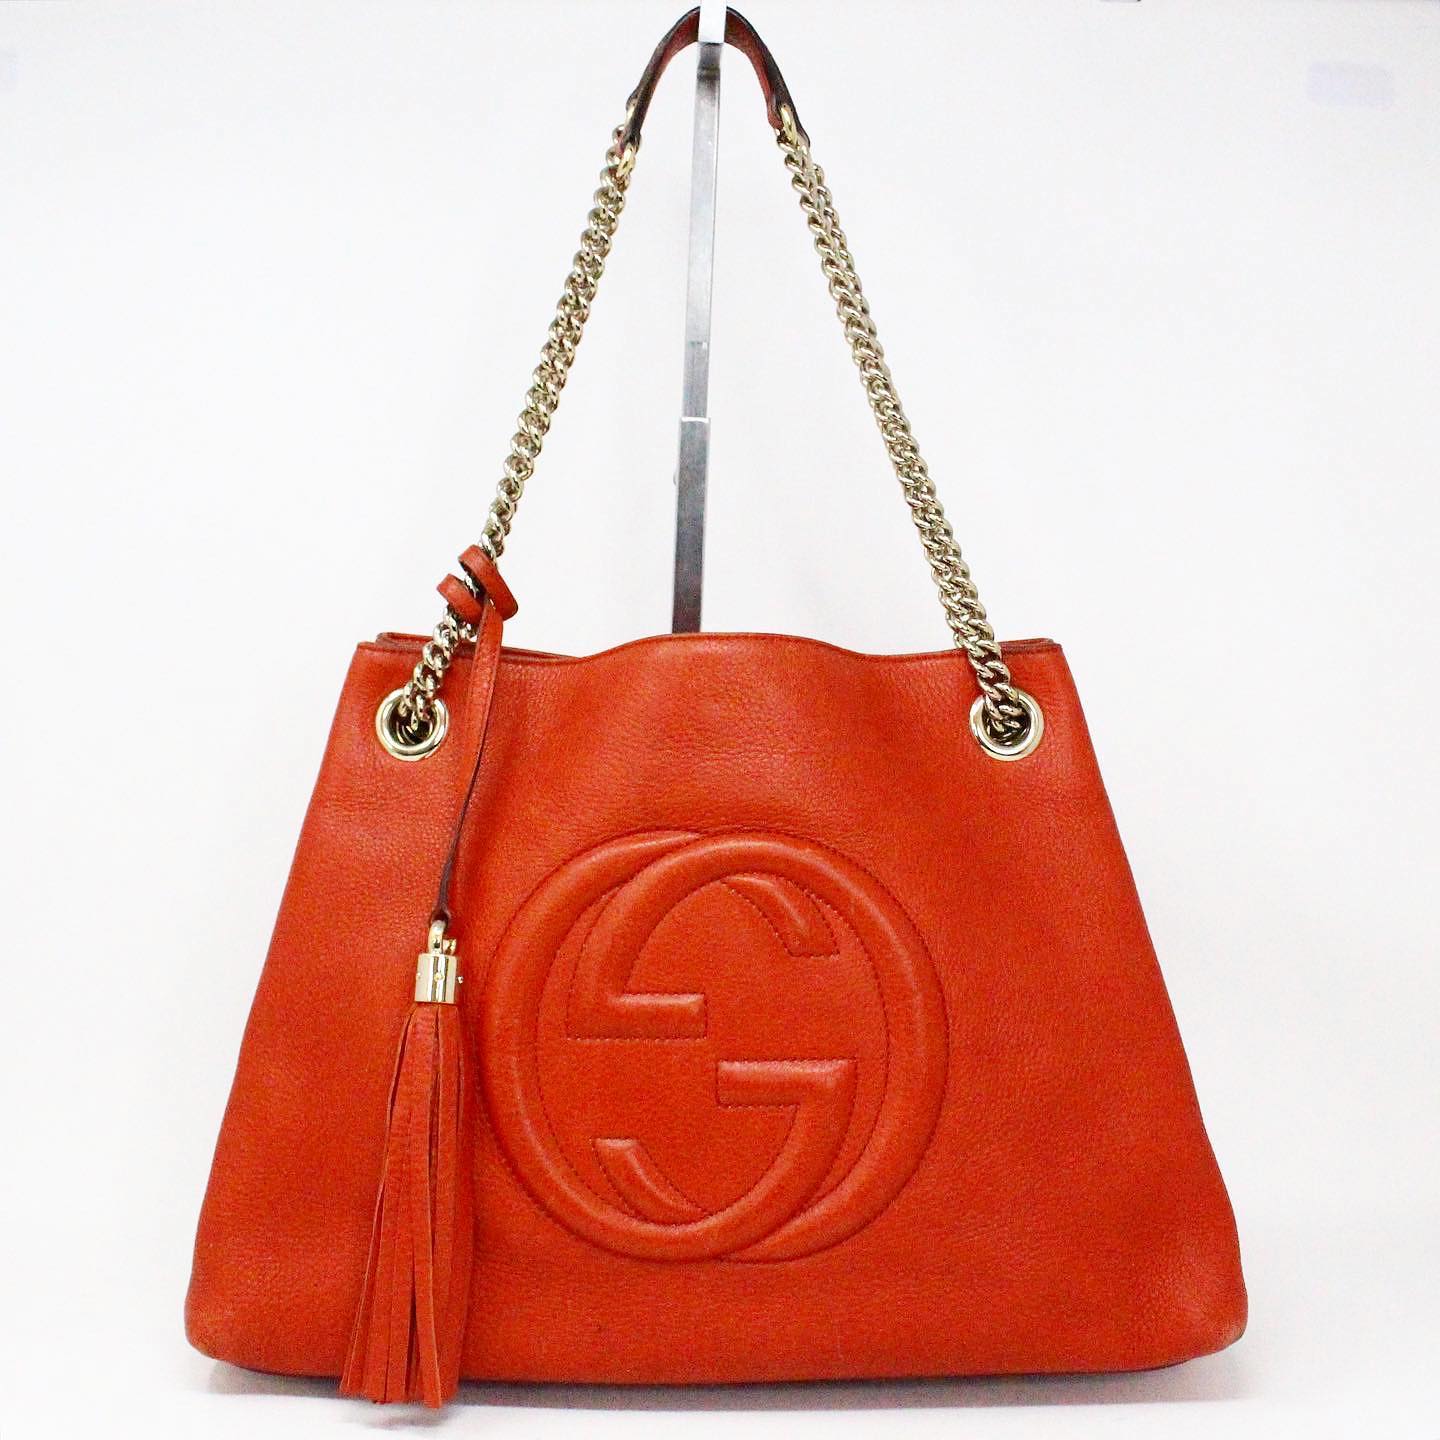 GUCCI #36716 Orange Soho Calfskin Leather Medium Chain-Strap Tote Bag – ALL  YOUR BLISS